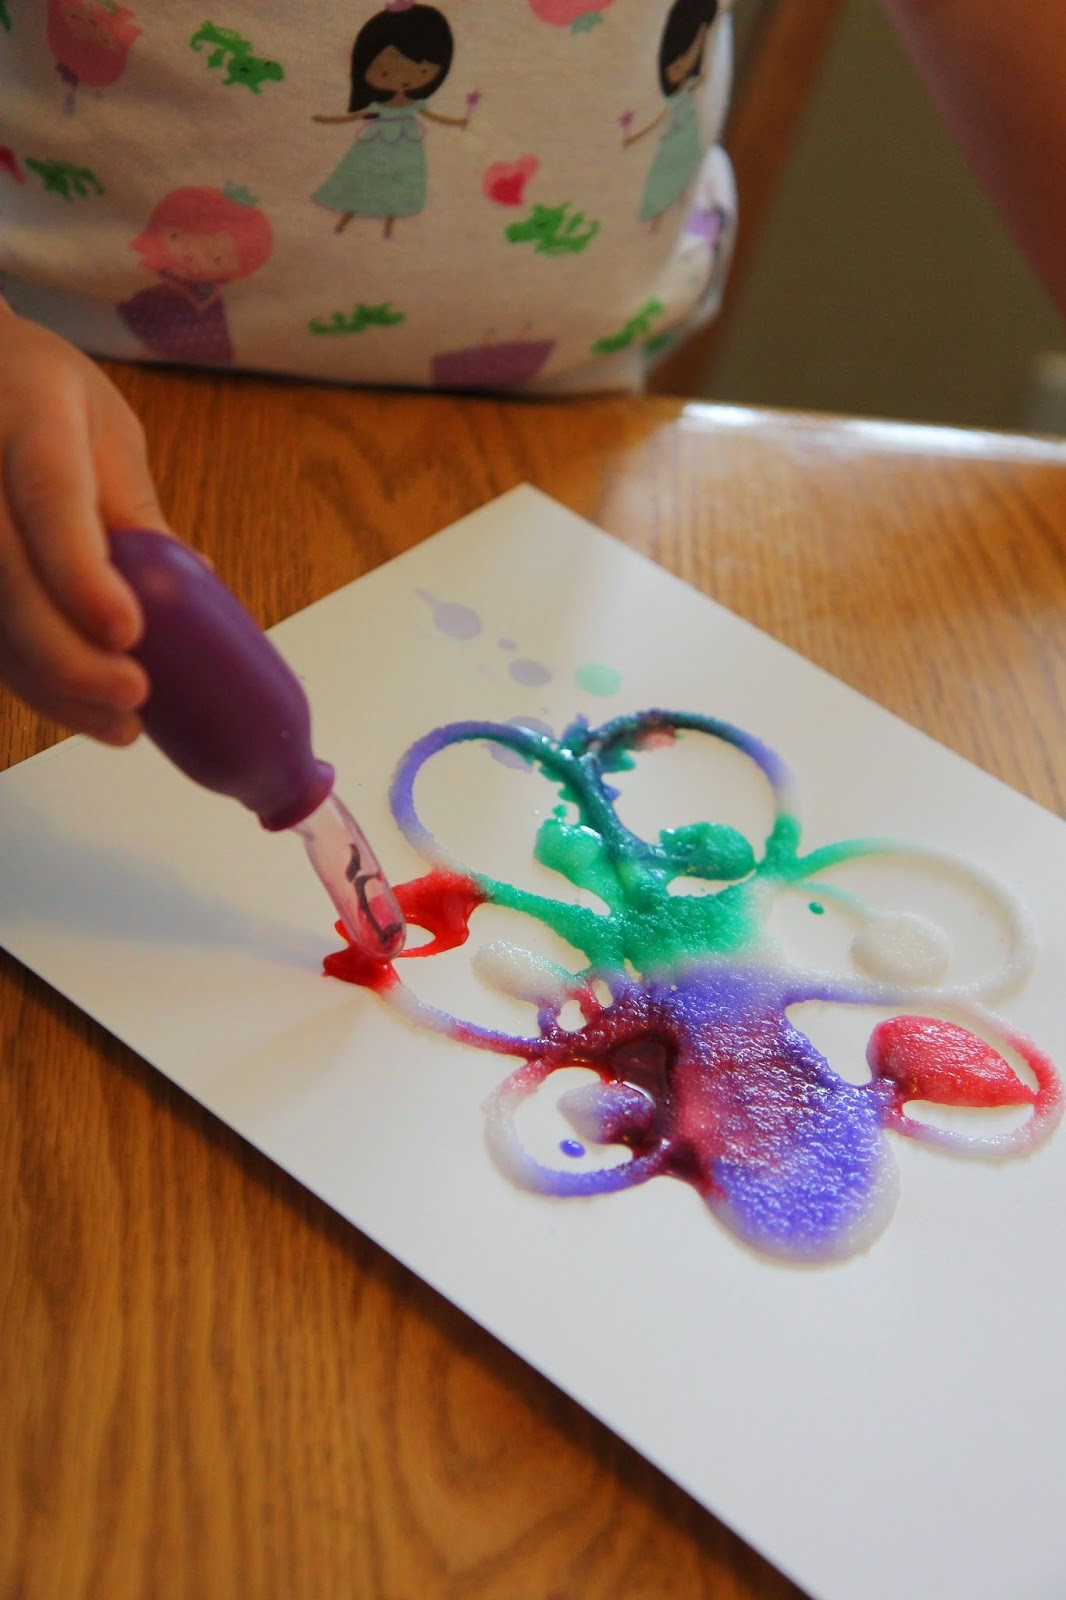 Painting Craft Ideas For Toddlers
 Toddler Approved 10 Favorite Supplies with Crafts to